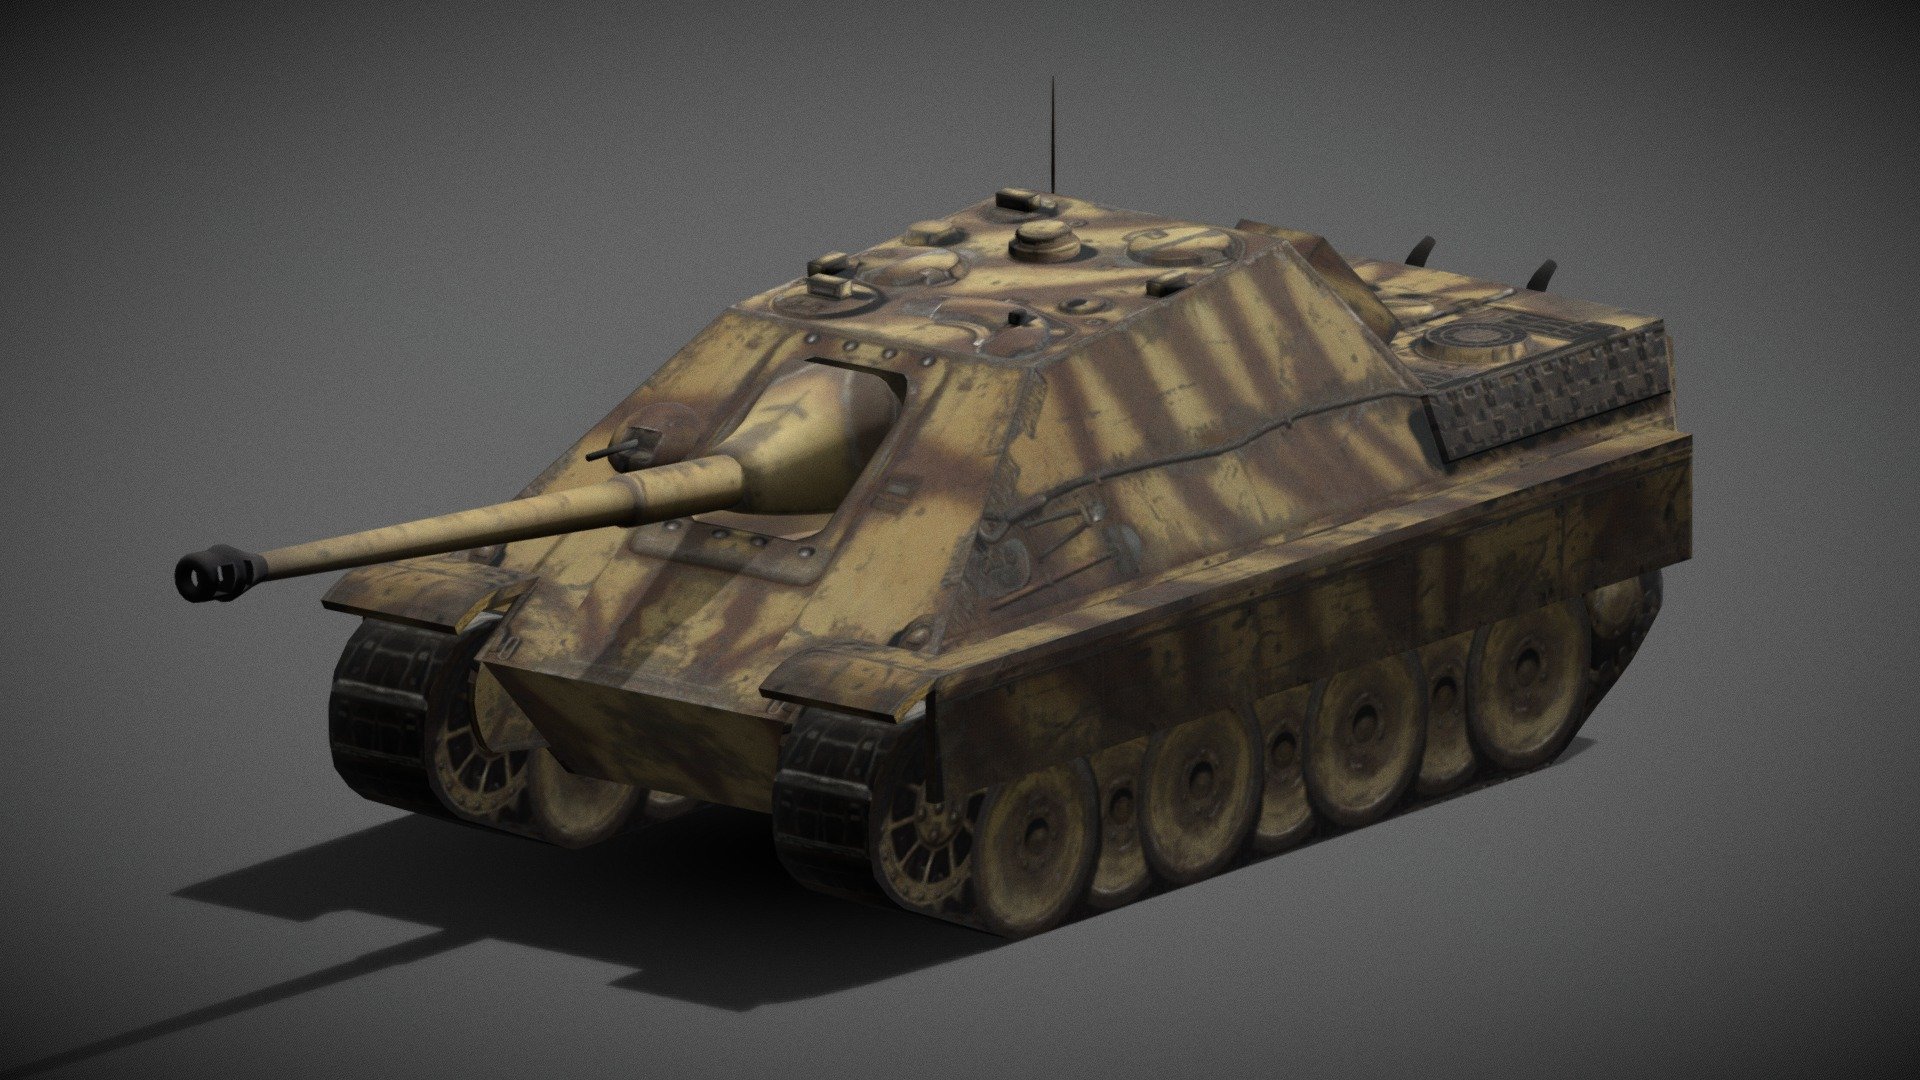 Textures were taken from screenshots in game.

The Jagdpanther (German: &ldquo;hunting panther